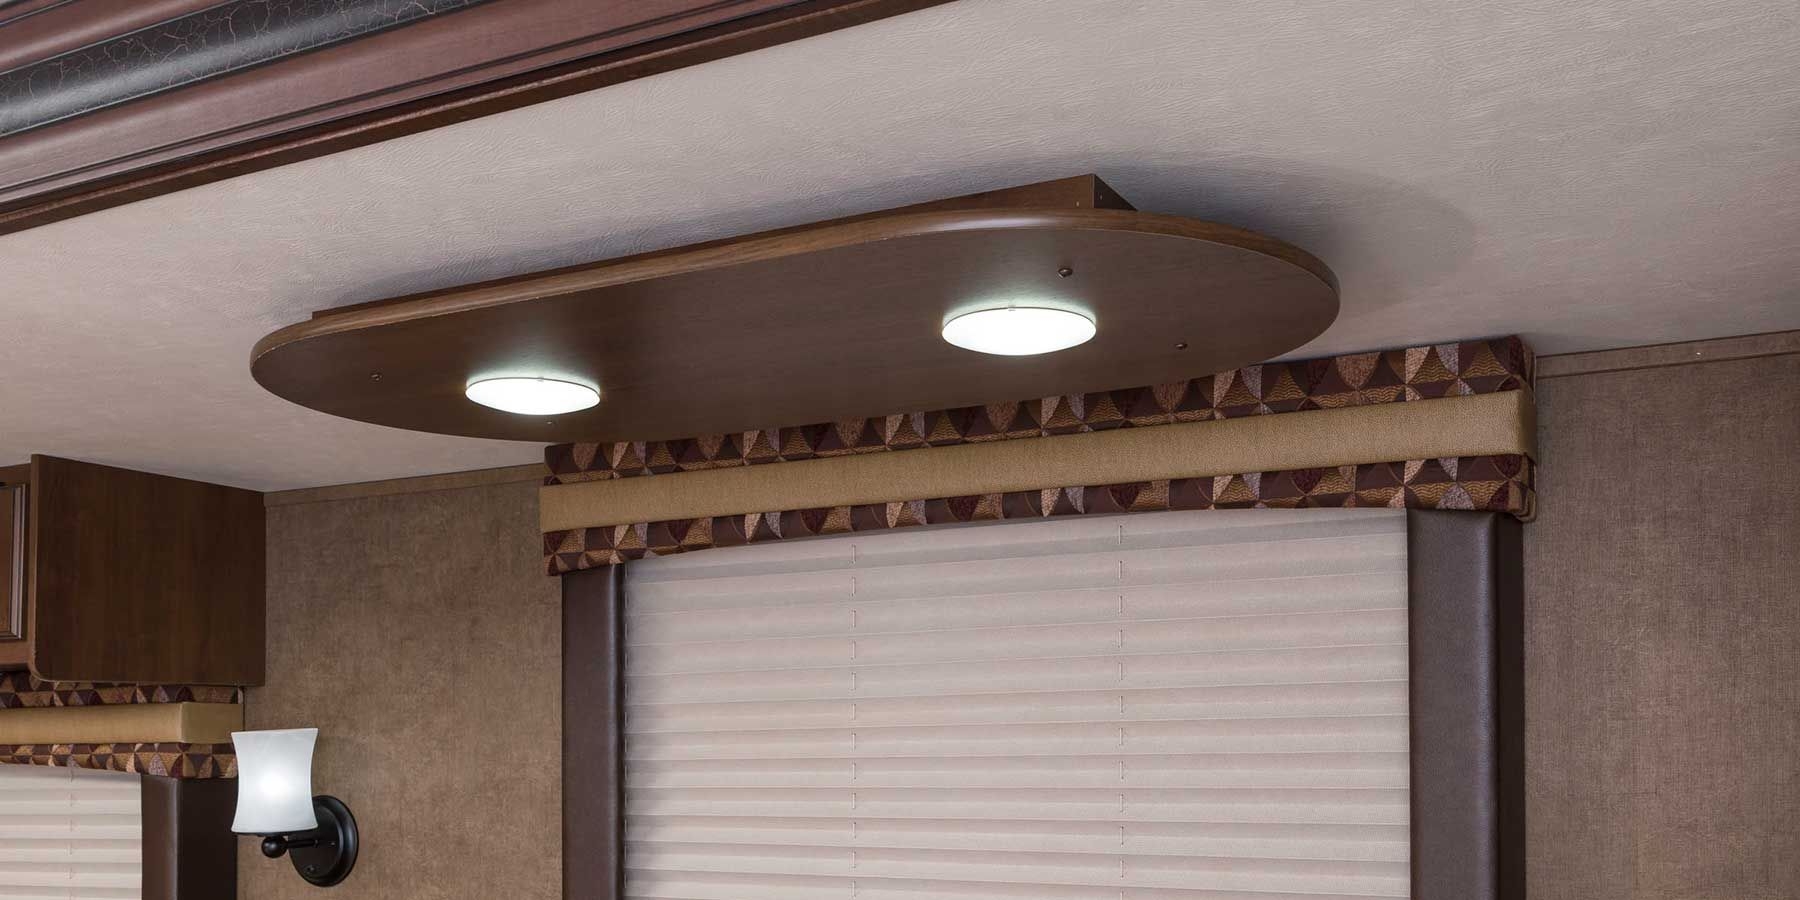 Permalink to Rv Ceiling Lights Led